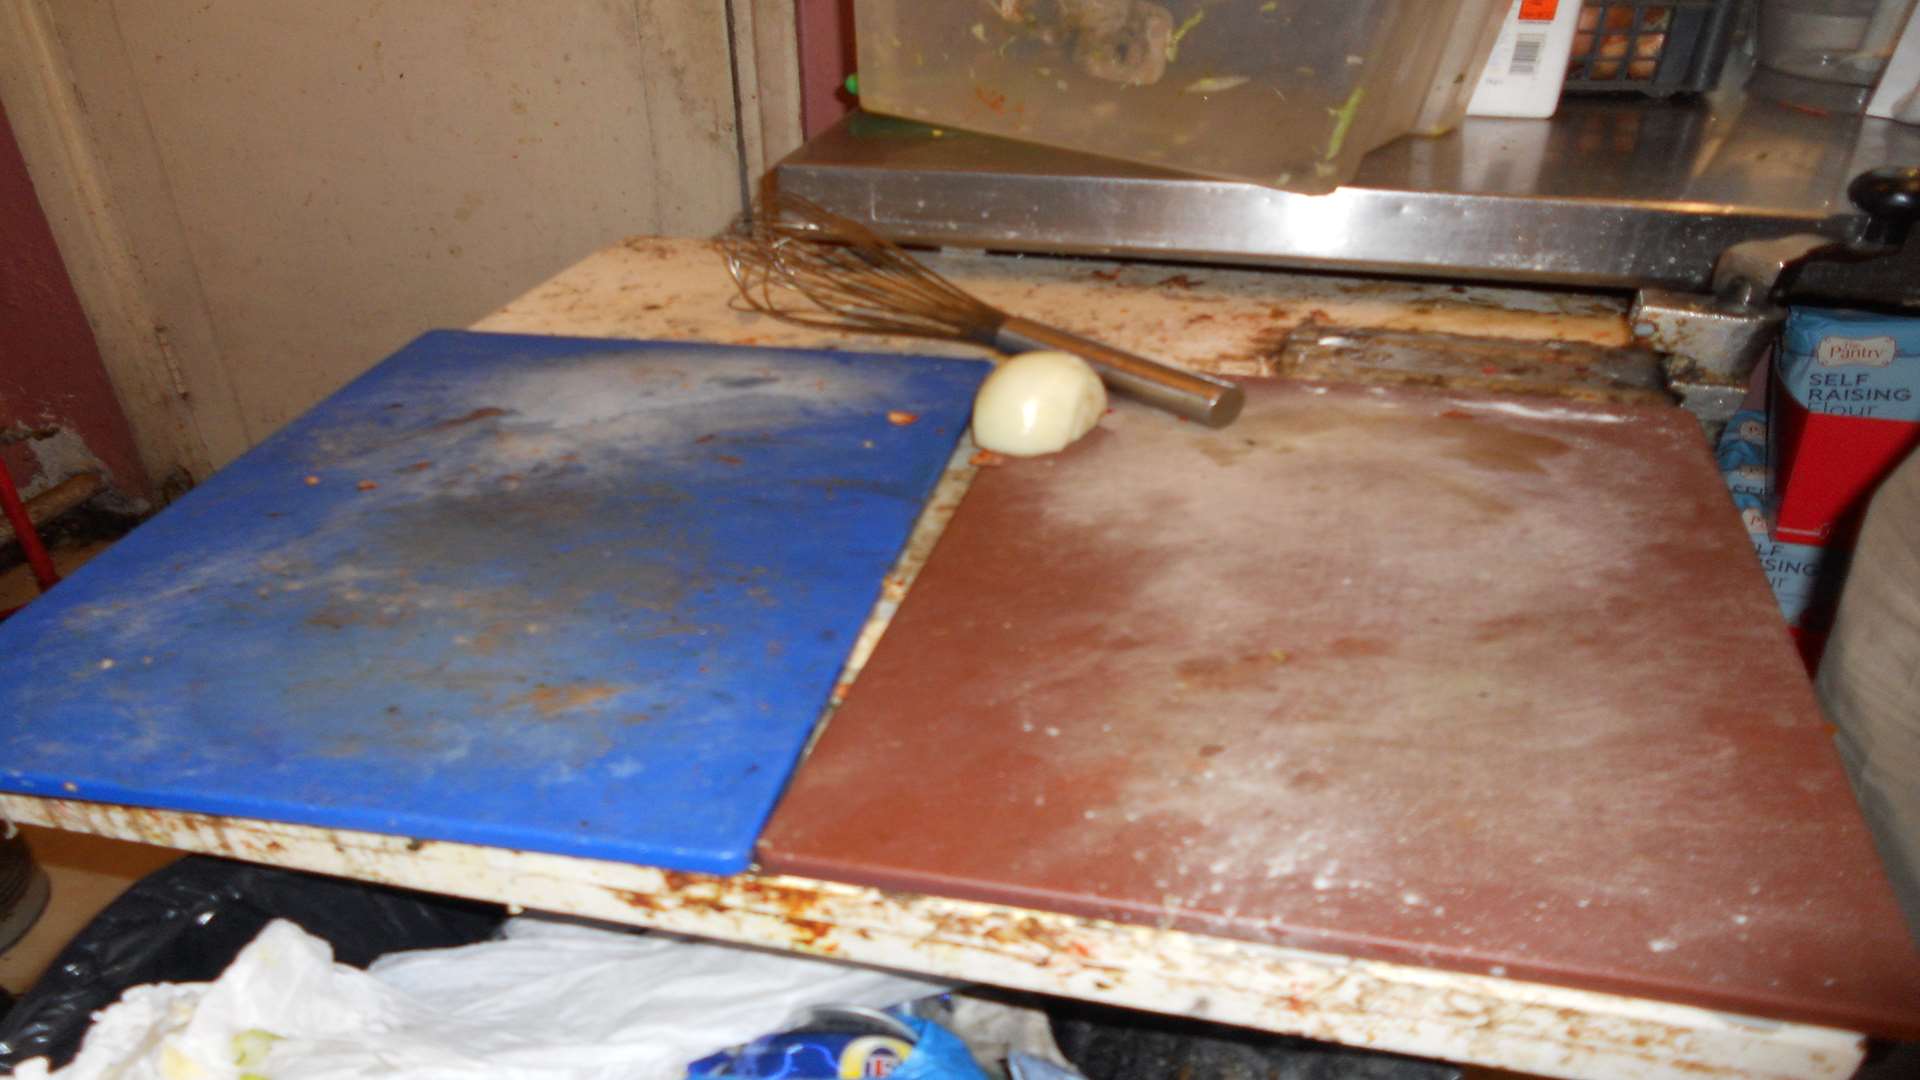 Inspectors look at the cleanliness of surfaces and appliances during their a to a food outlet